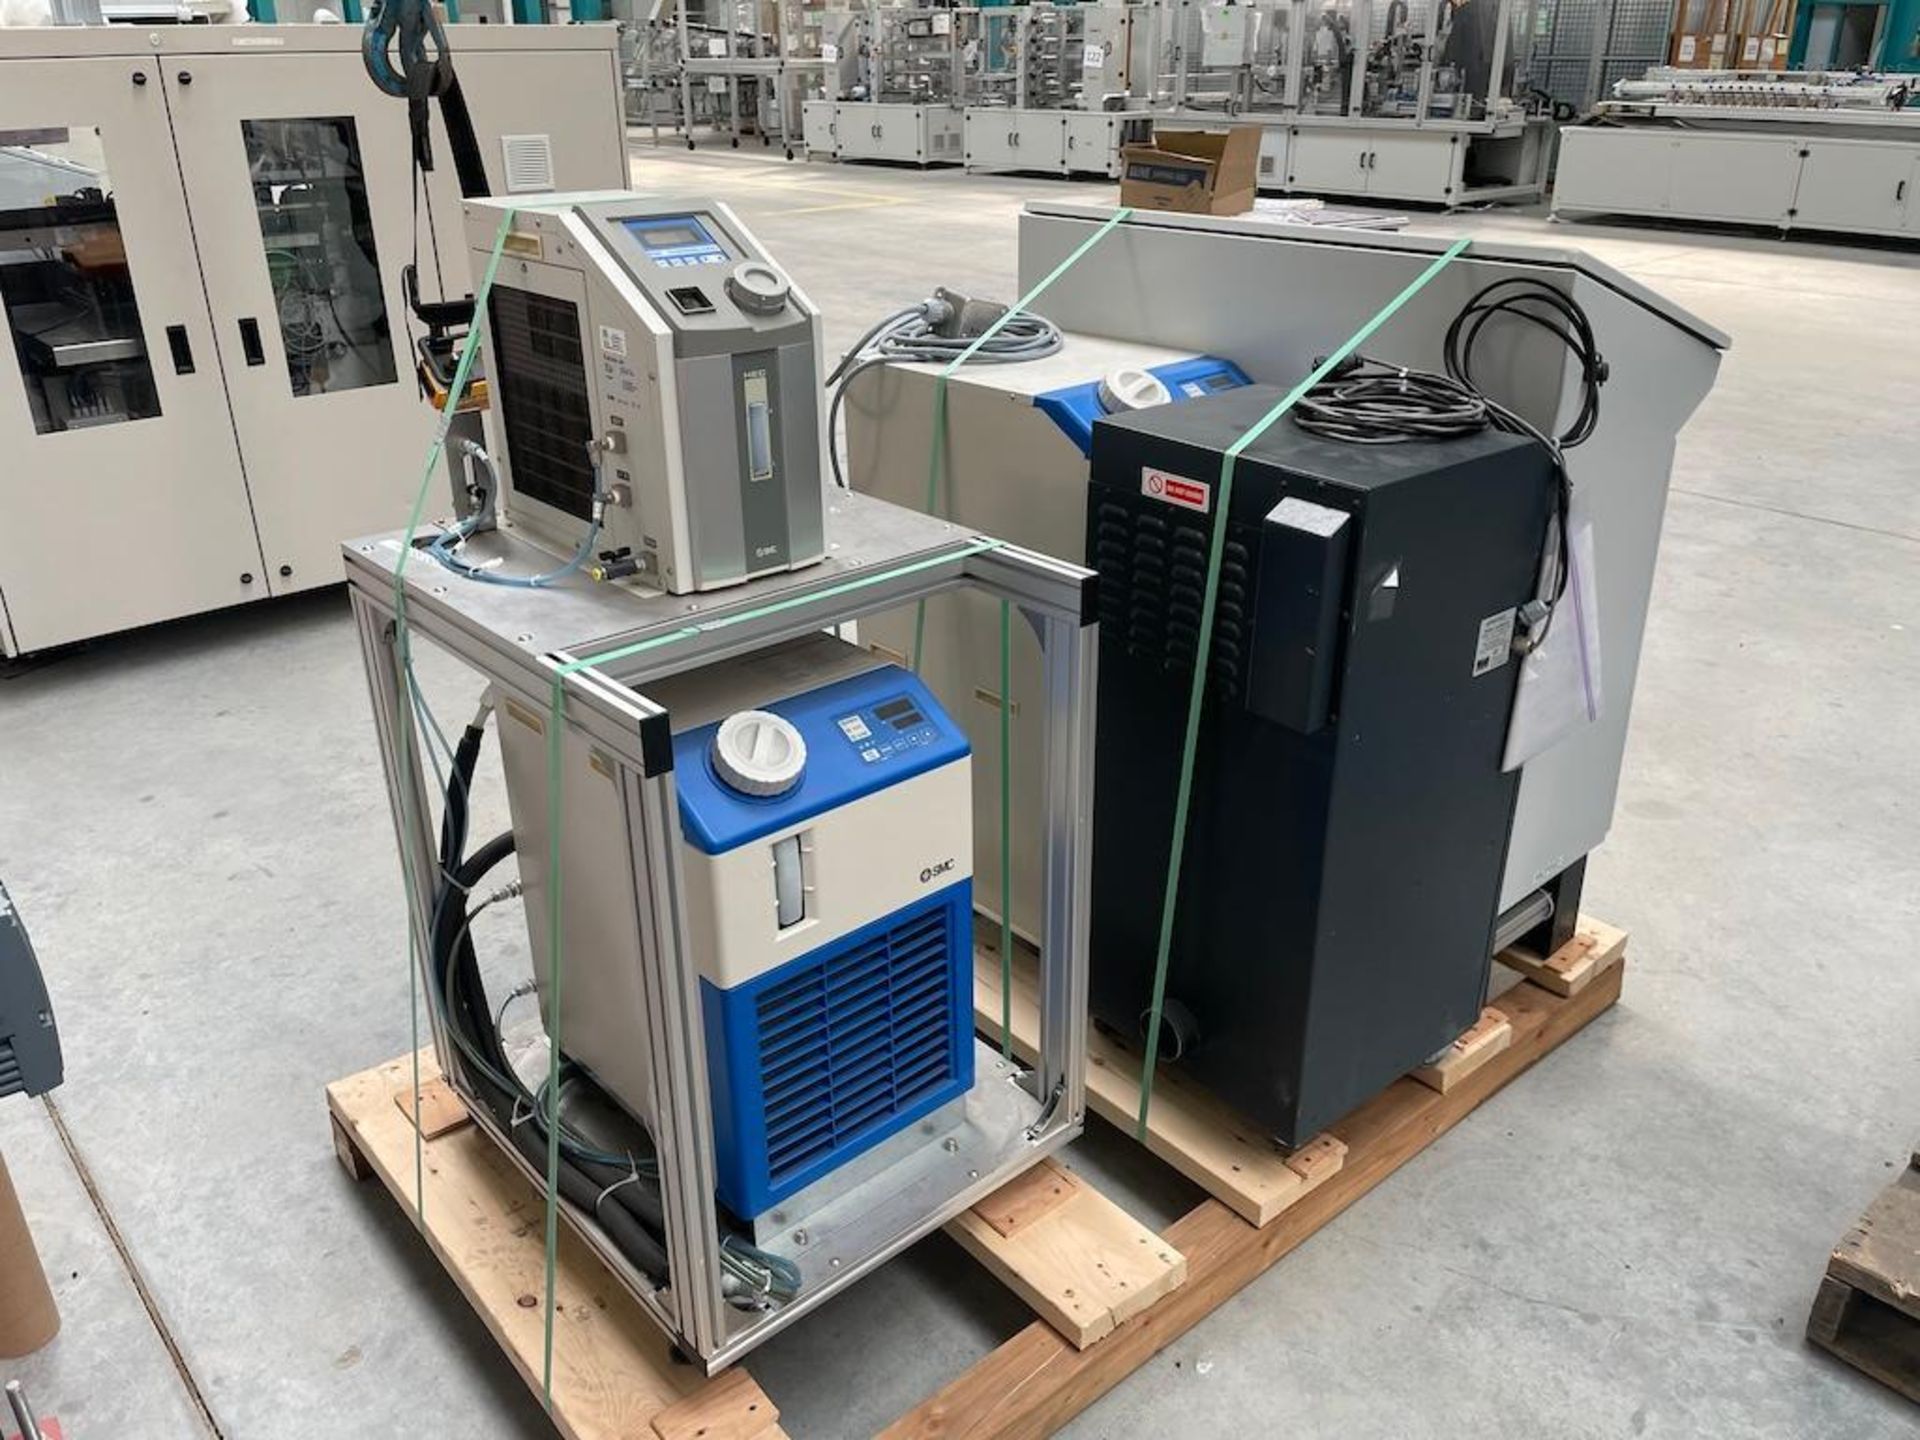 SKID LOT W (3) CHILLERS, CONTROL PANEL PARTS INCLUDING: SMC THERMO CHILLER MODEL HRS050-WN-20-M, HRS